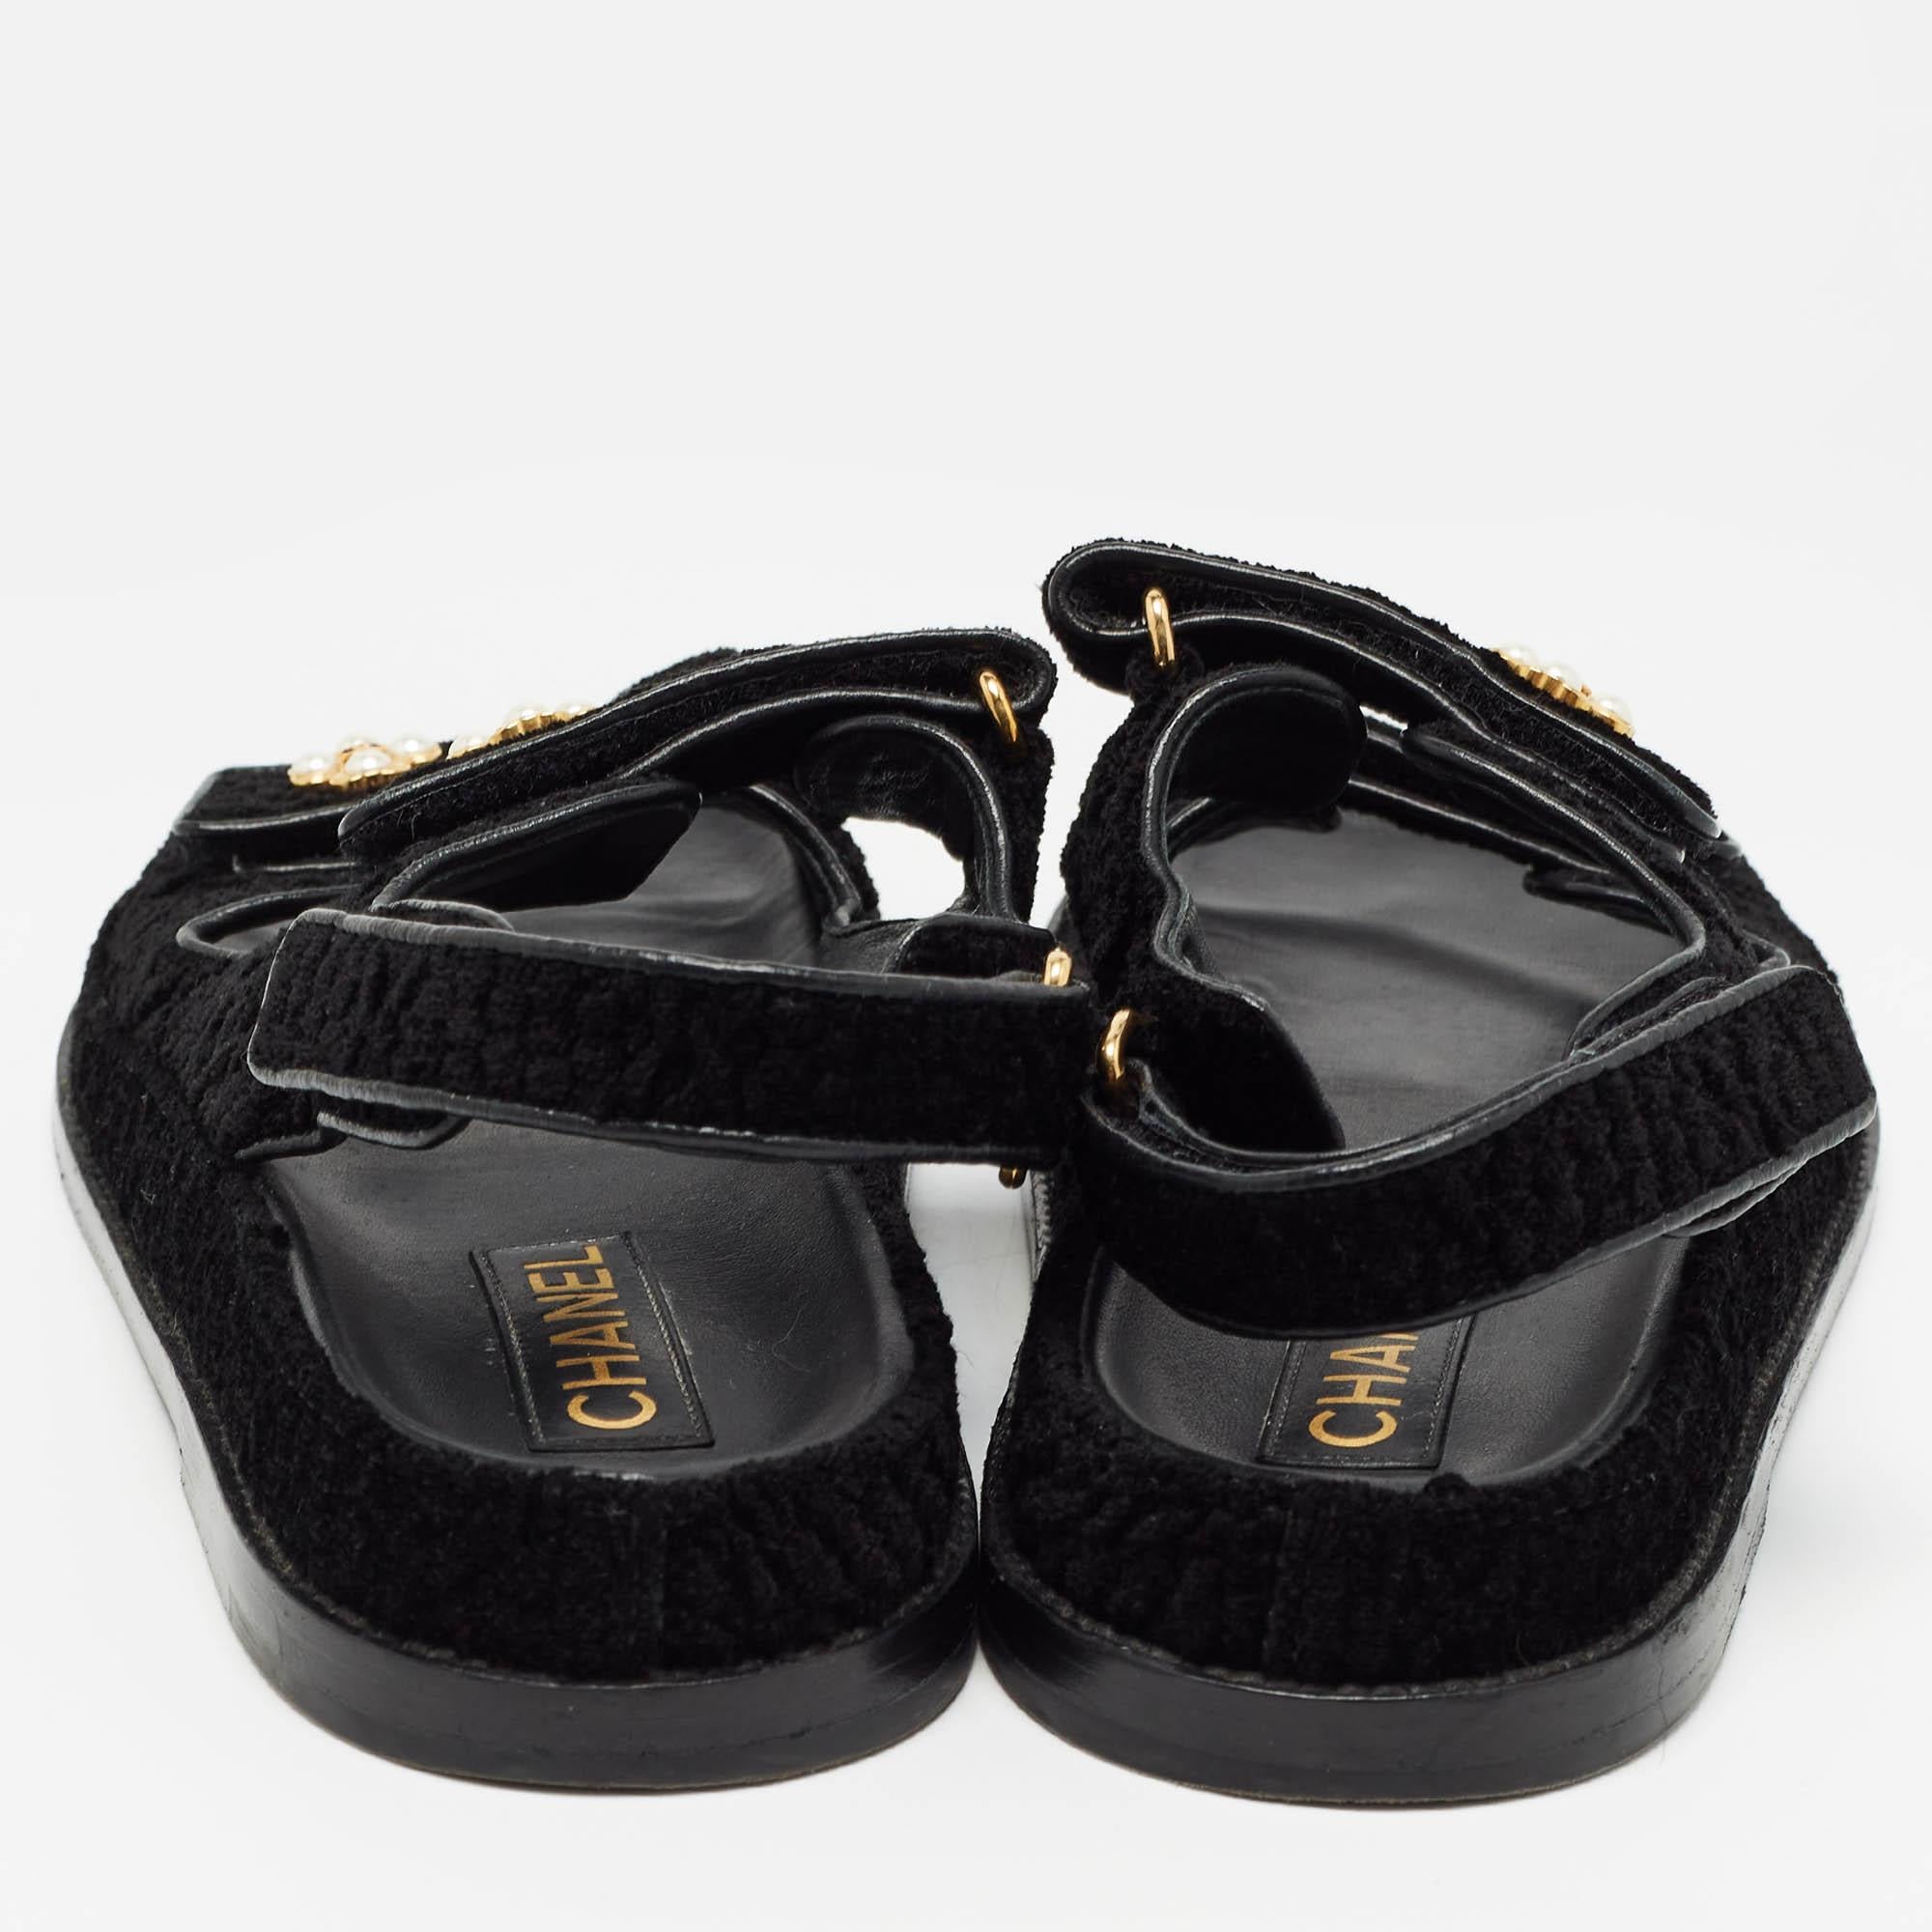 Complement your well-put-together outfit with these authentic Chanel dad sandals. Timeless and classy, they have an amazing construction for enduring quality and comfortable fit.

Includes: Original Dustbag